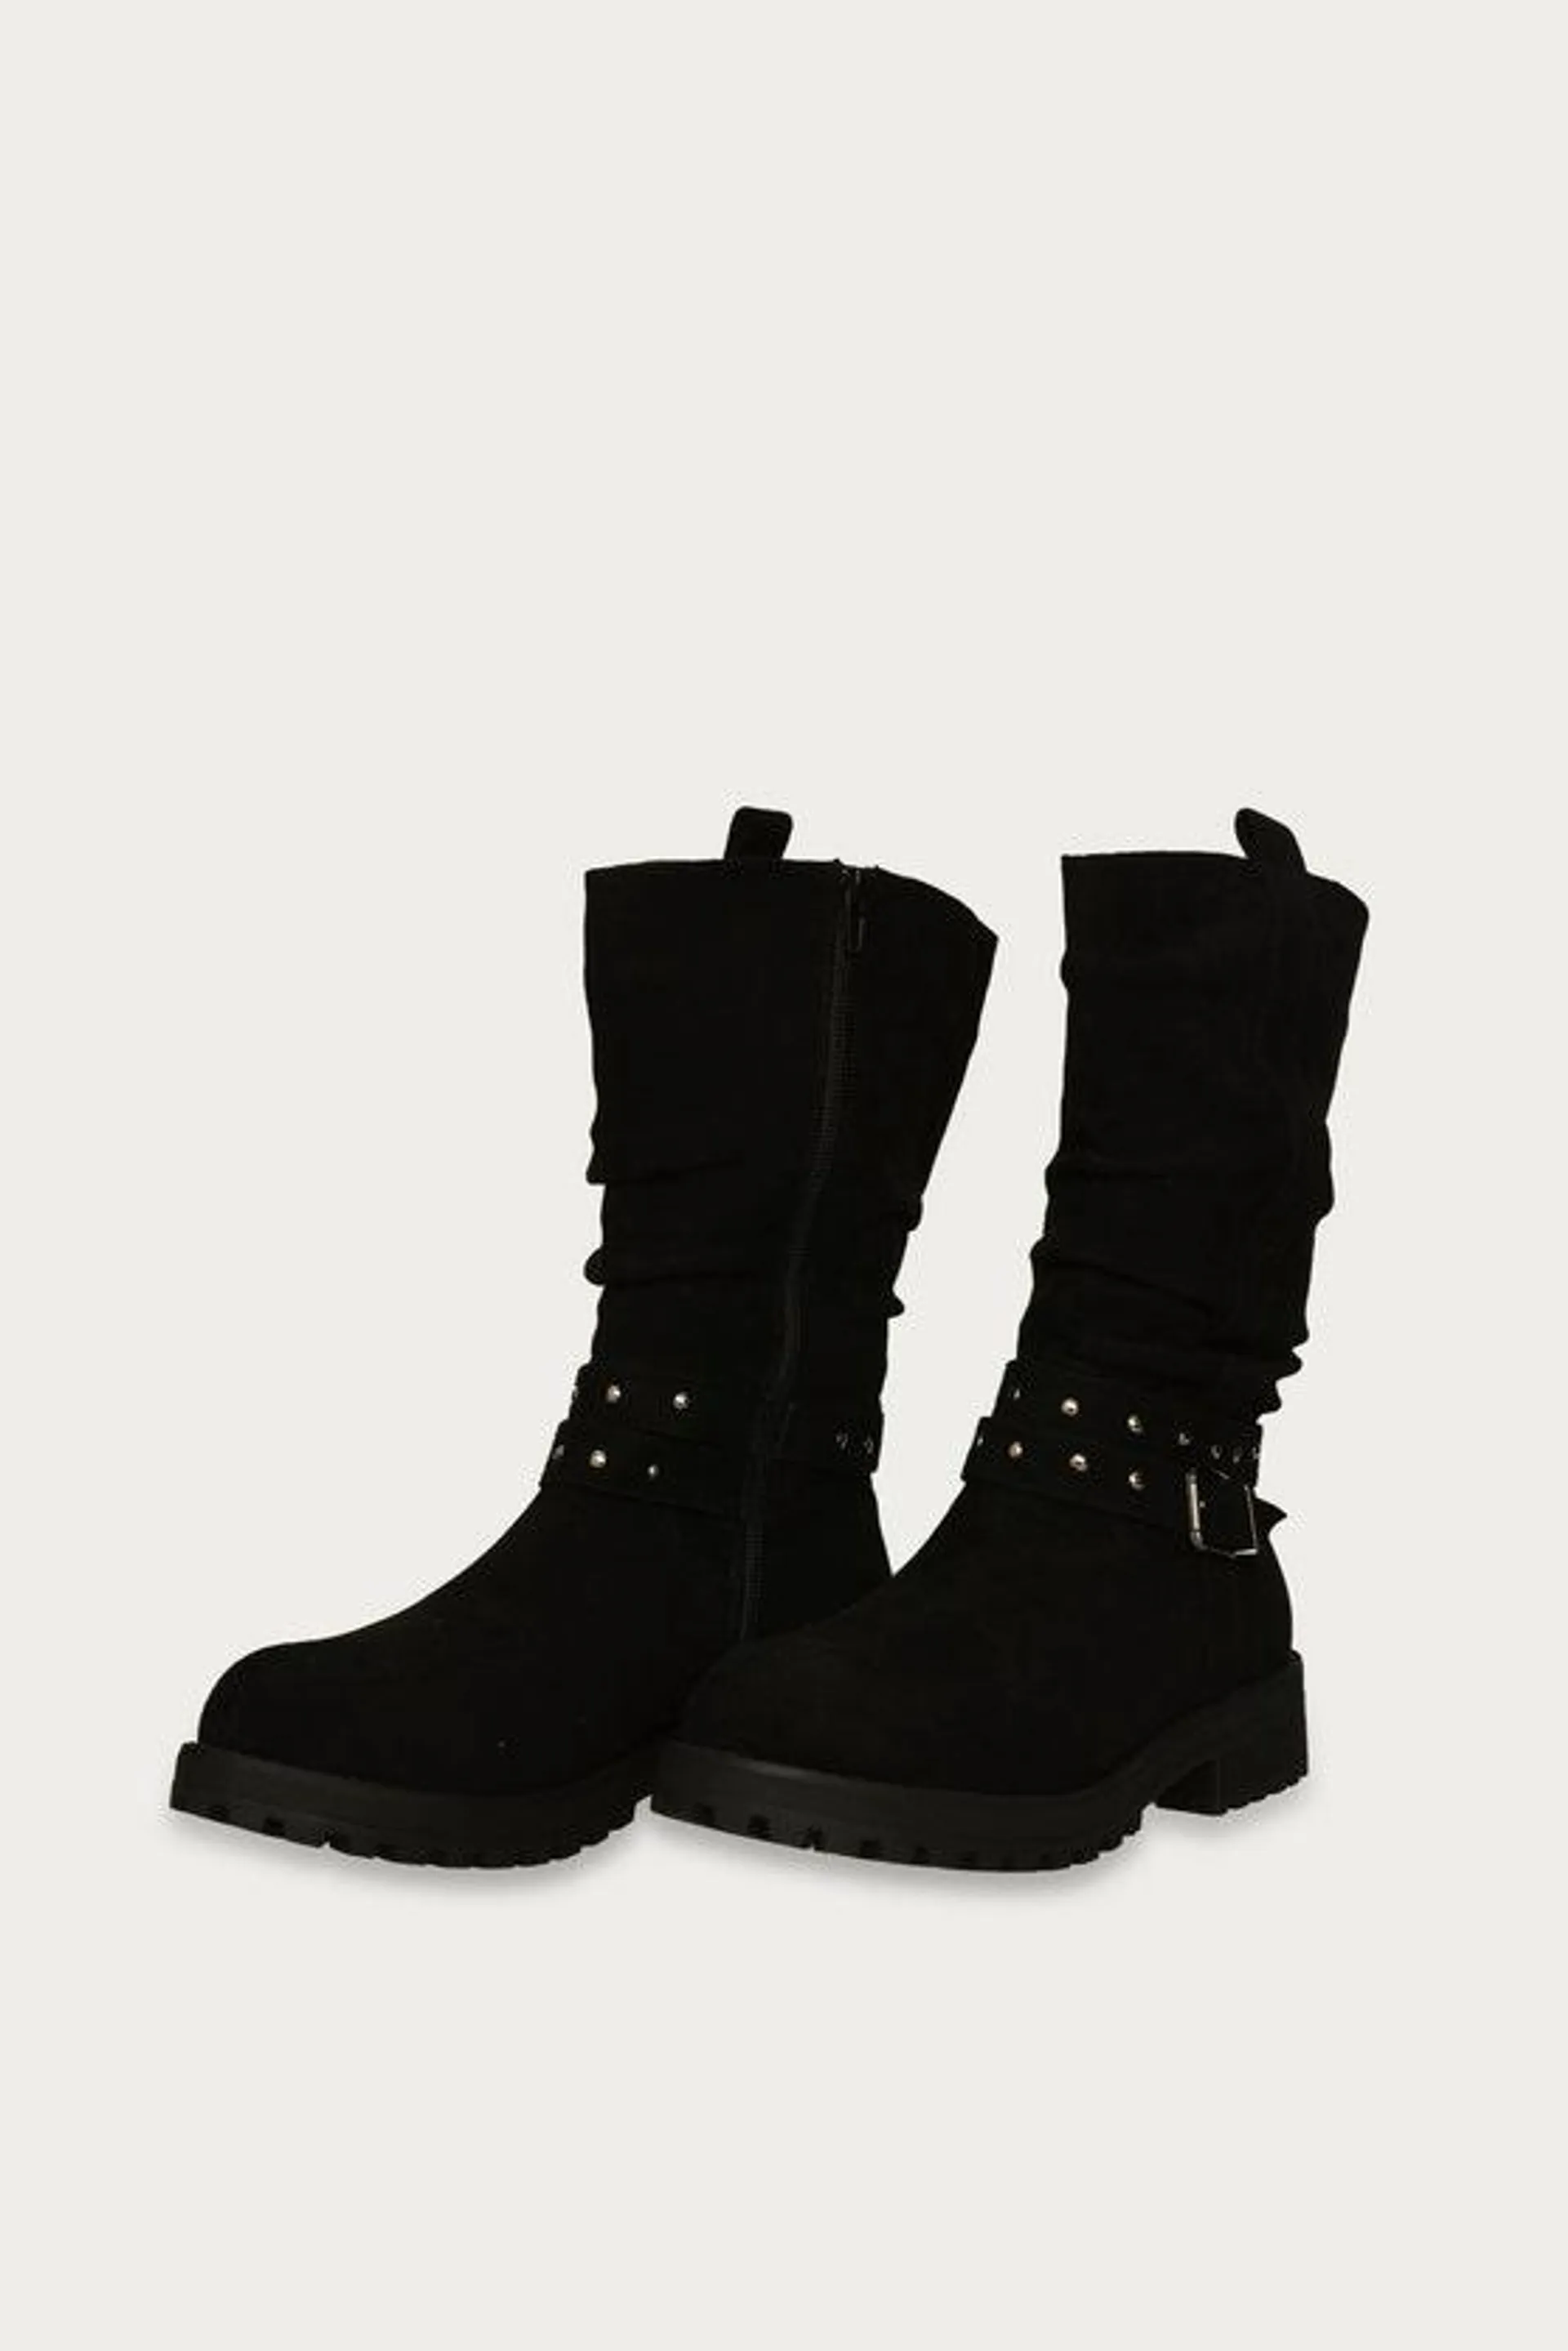 Black Ruched Buckle Mid Length Biker Boots